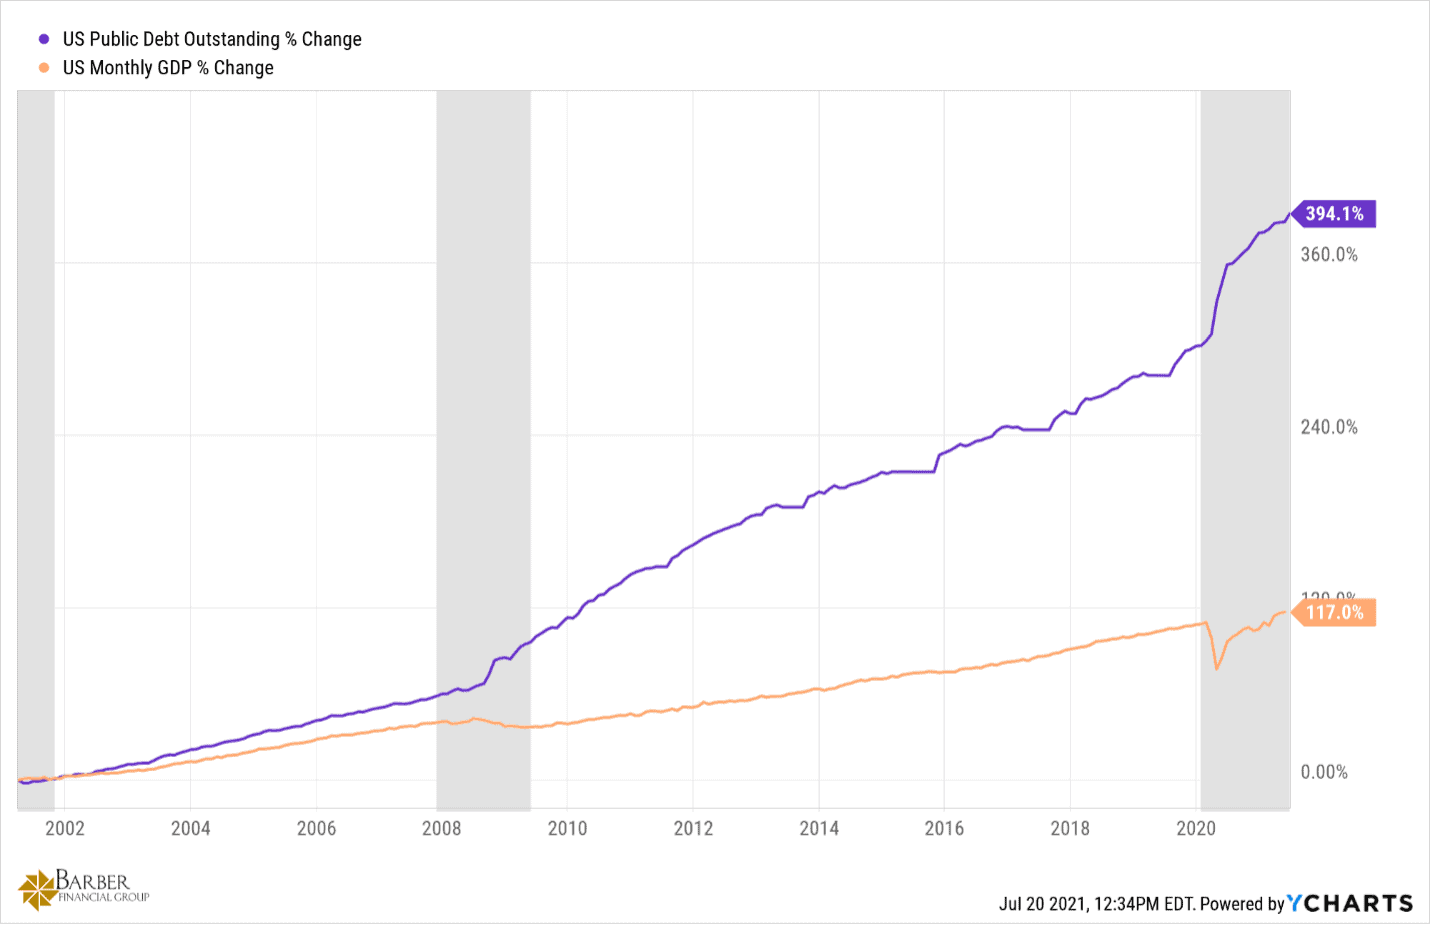 National Debt - Public Change and GDP Change